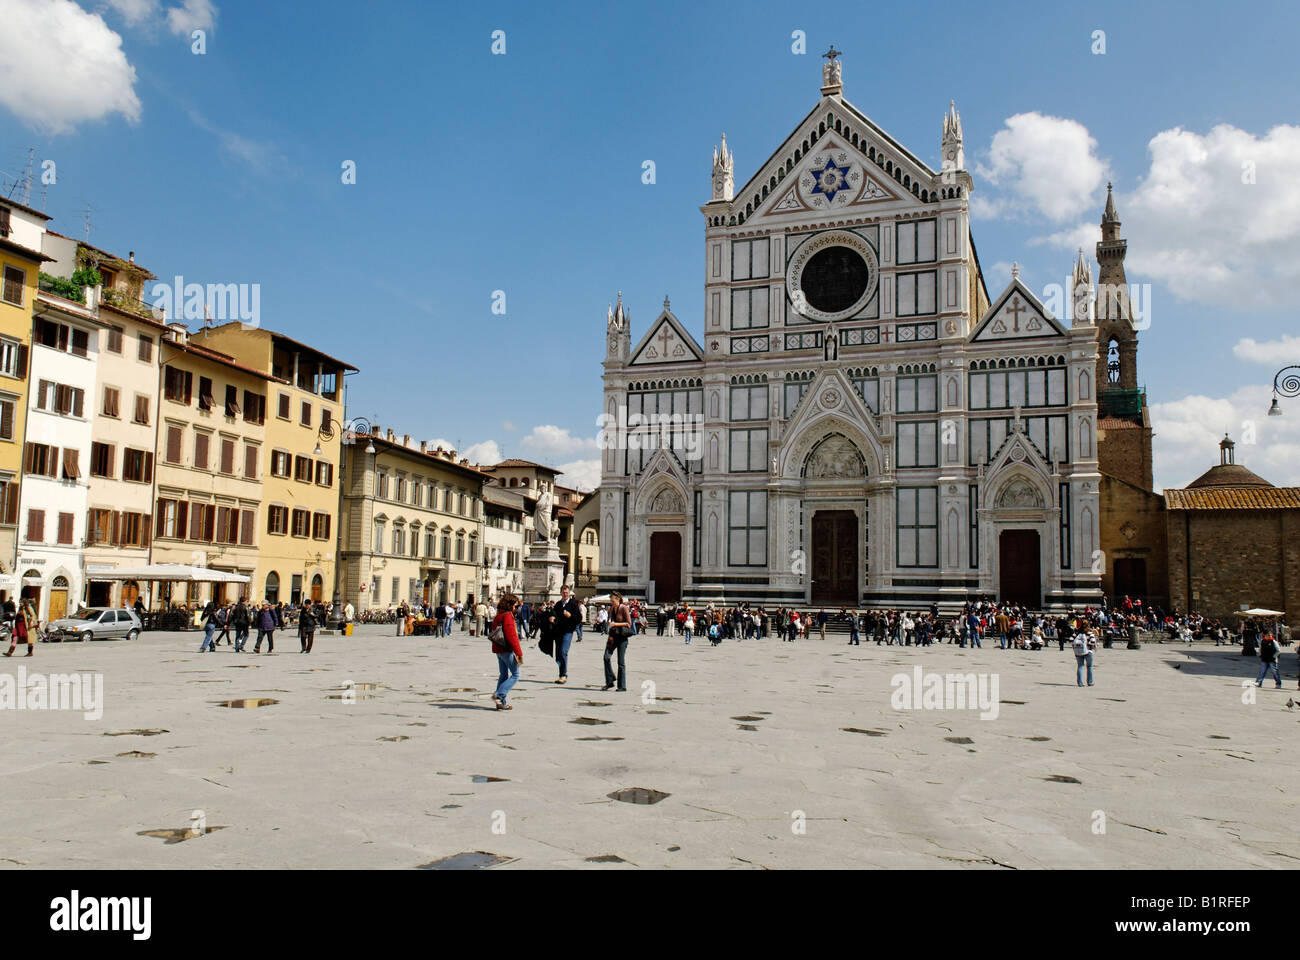 Santa Croce Basilica and Piazza, Florence, UNESCO World Heritage Site, Tuscany, Italy, Europe Stock Photo